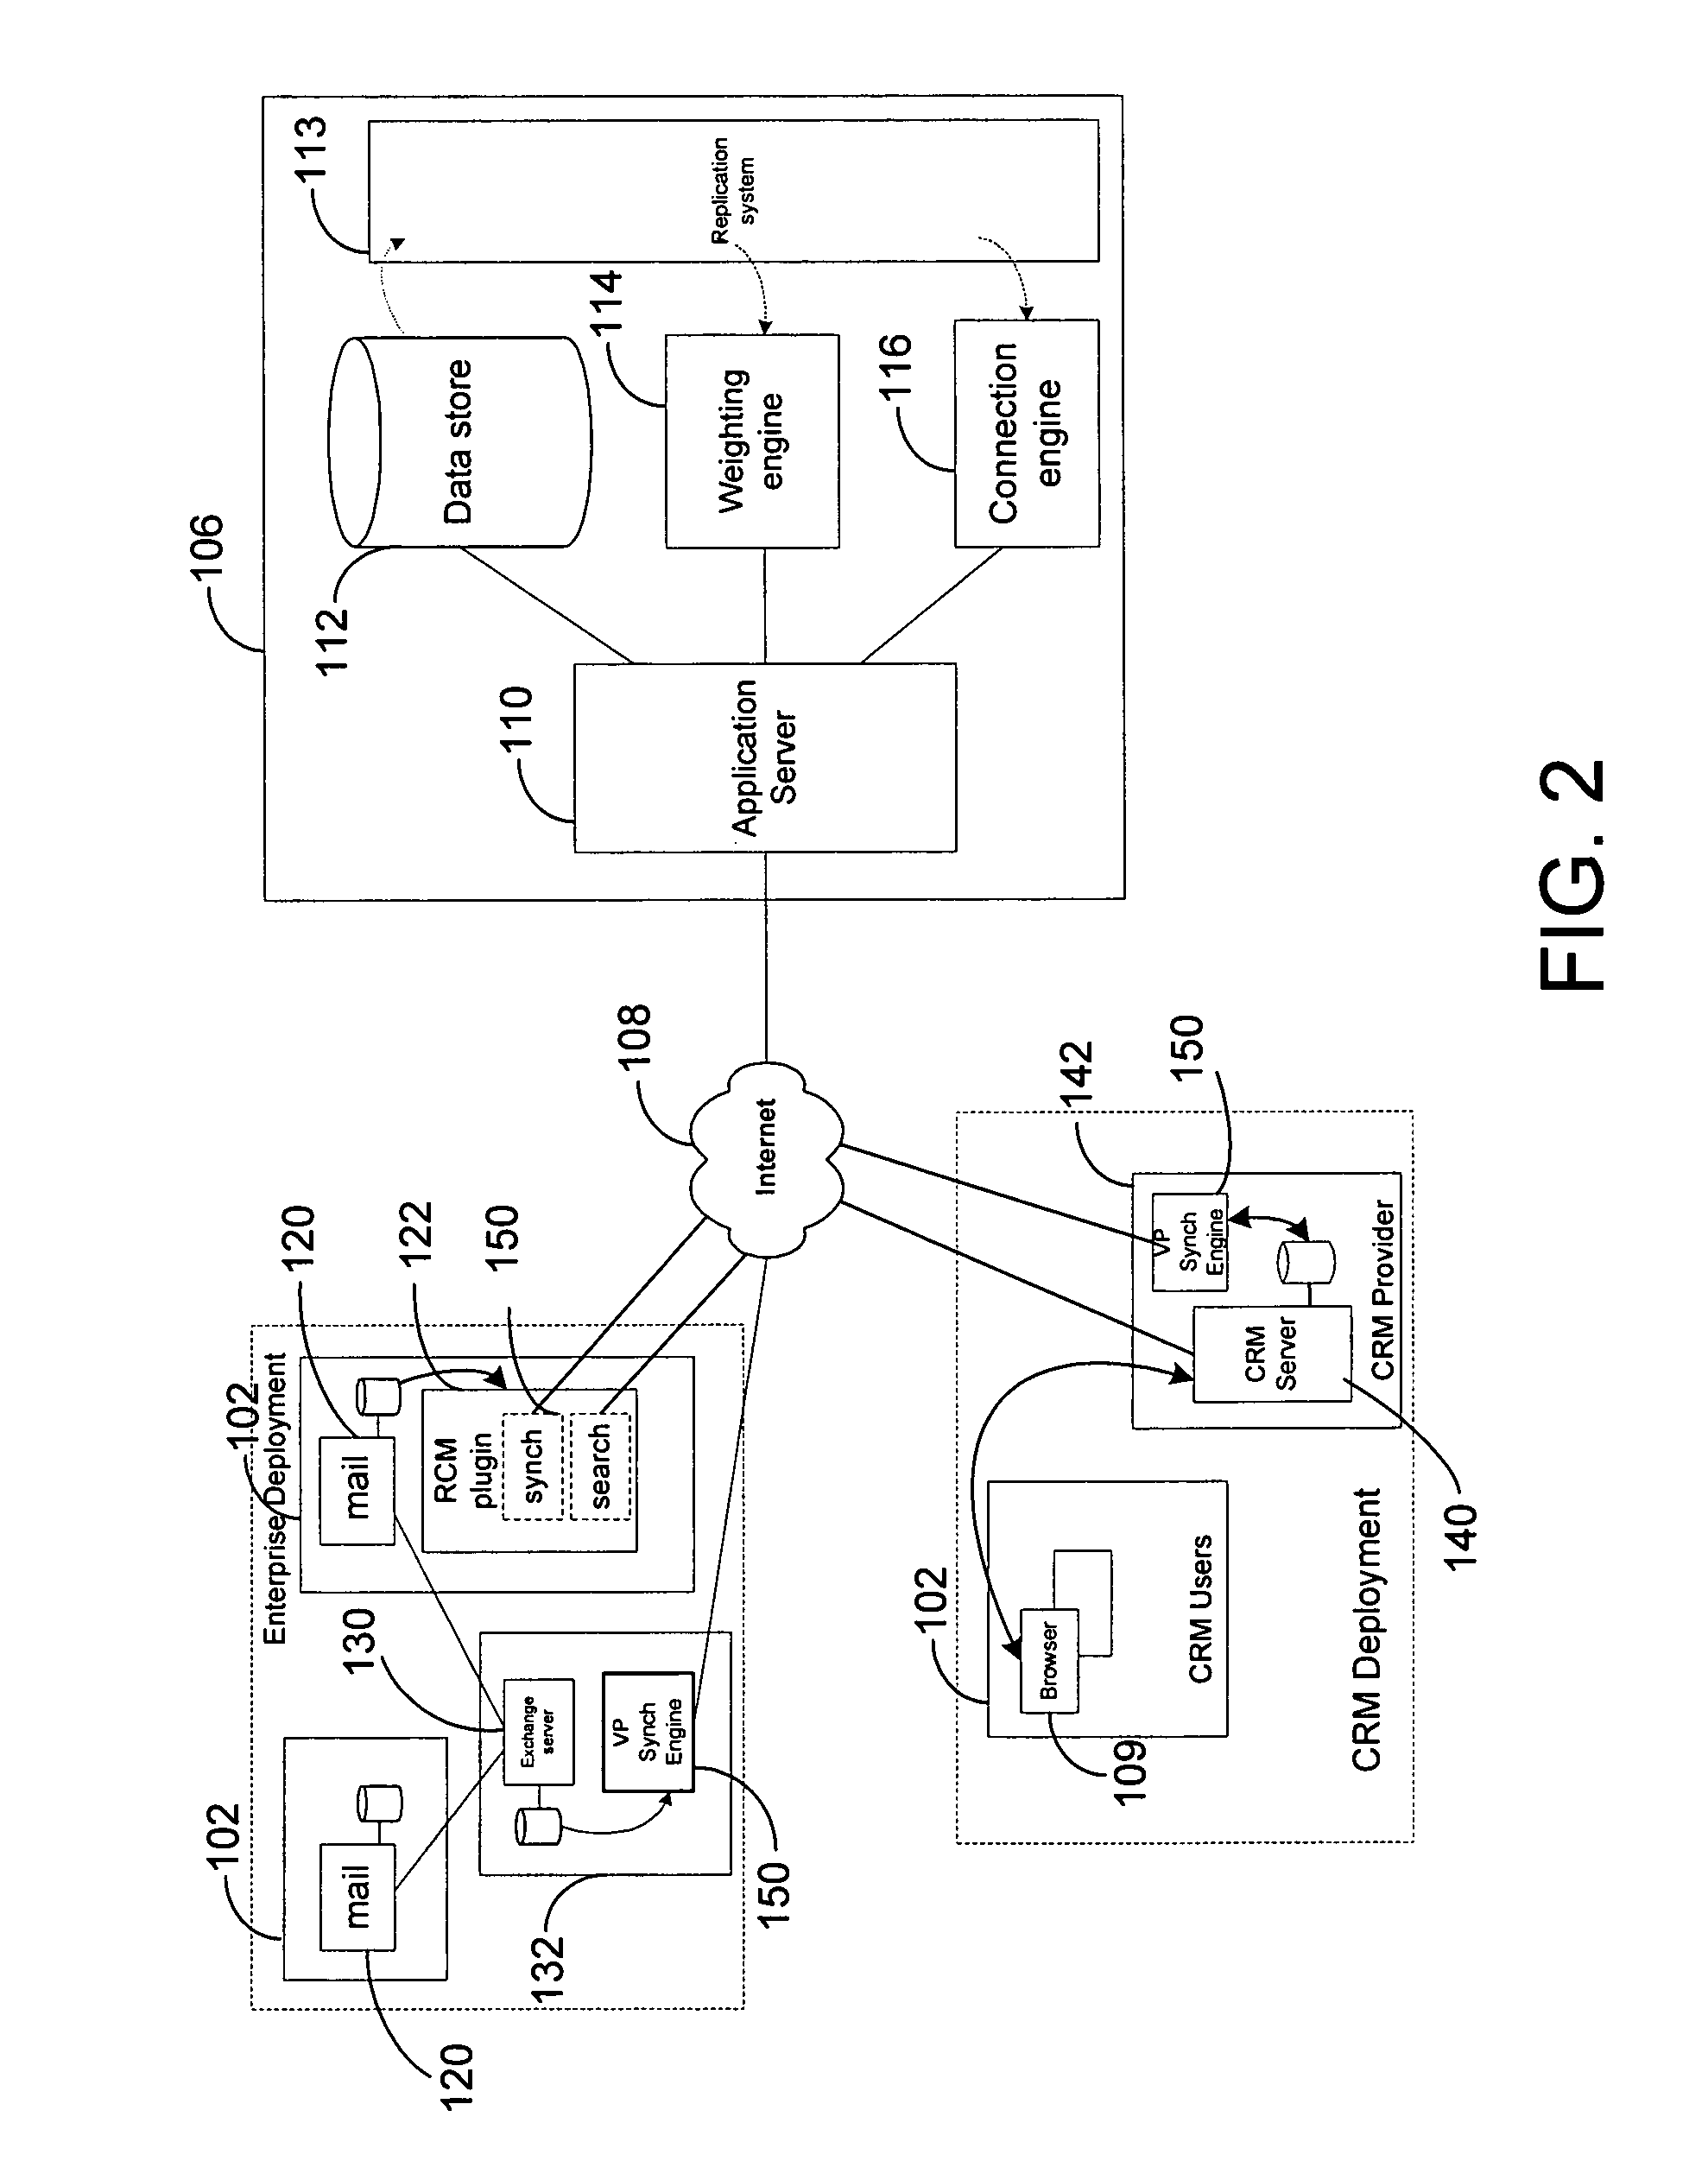 System and method for enforcing privacy in social networks